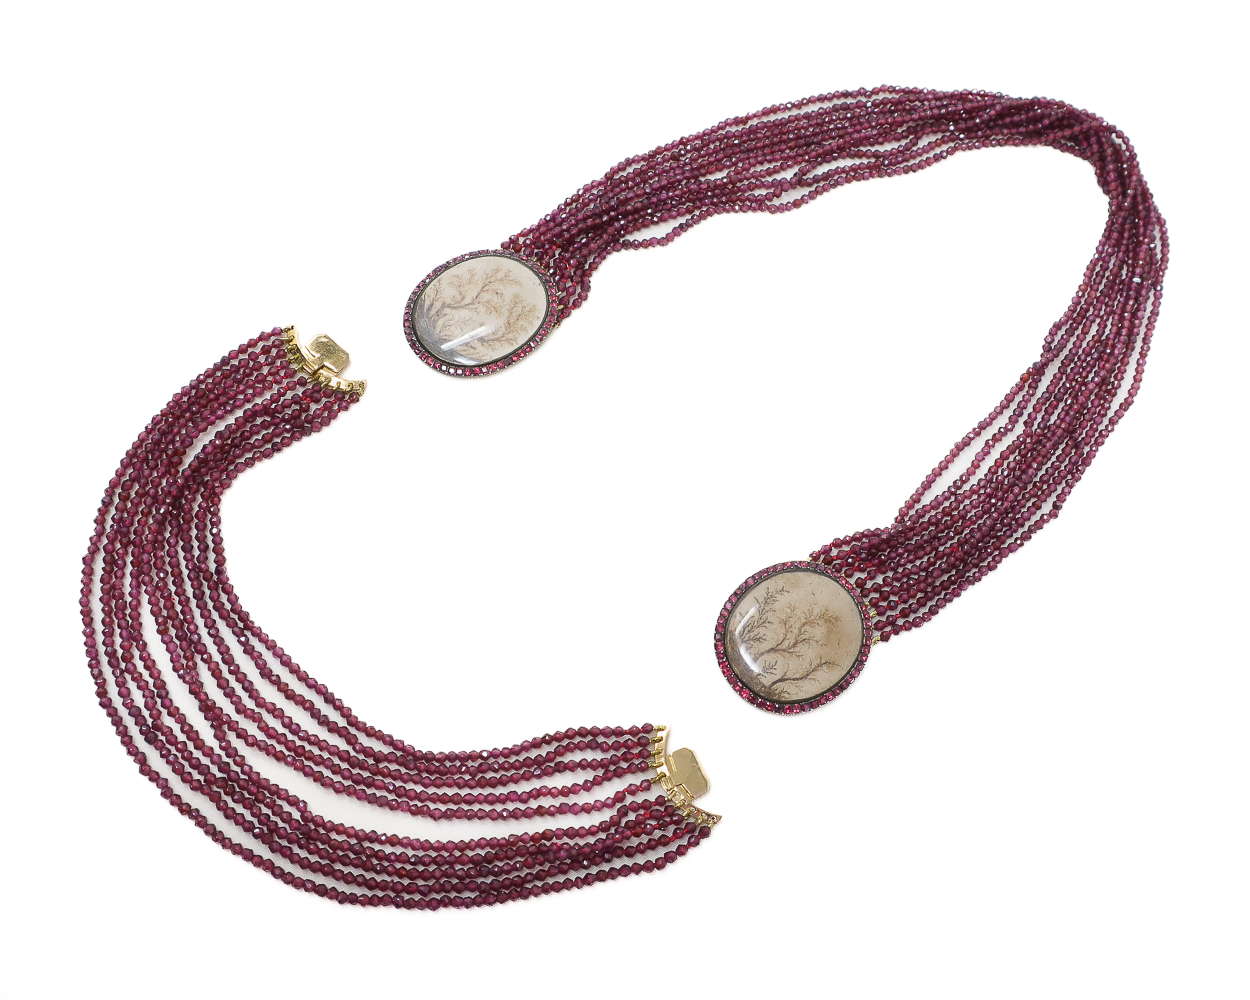 Early-Victorian Garnet Strand Hair Necklace